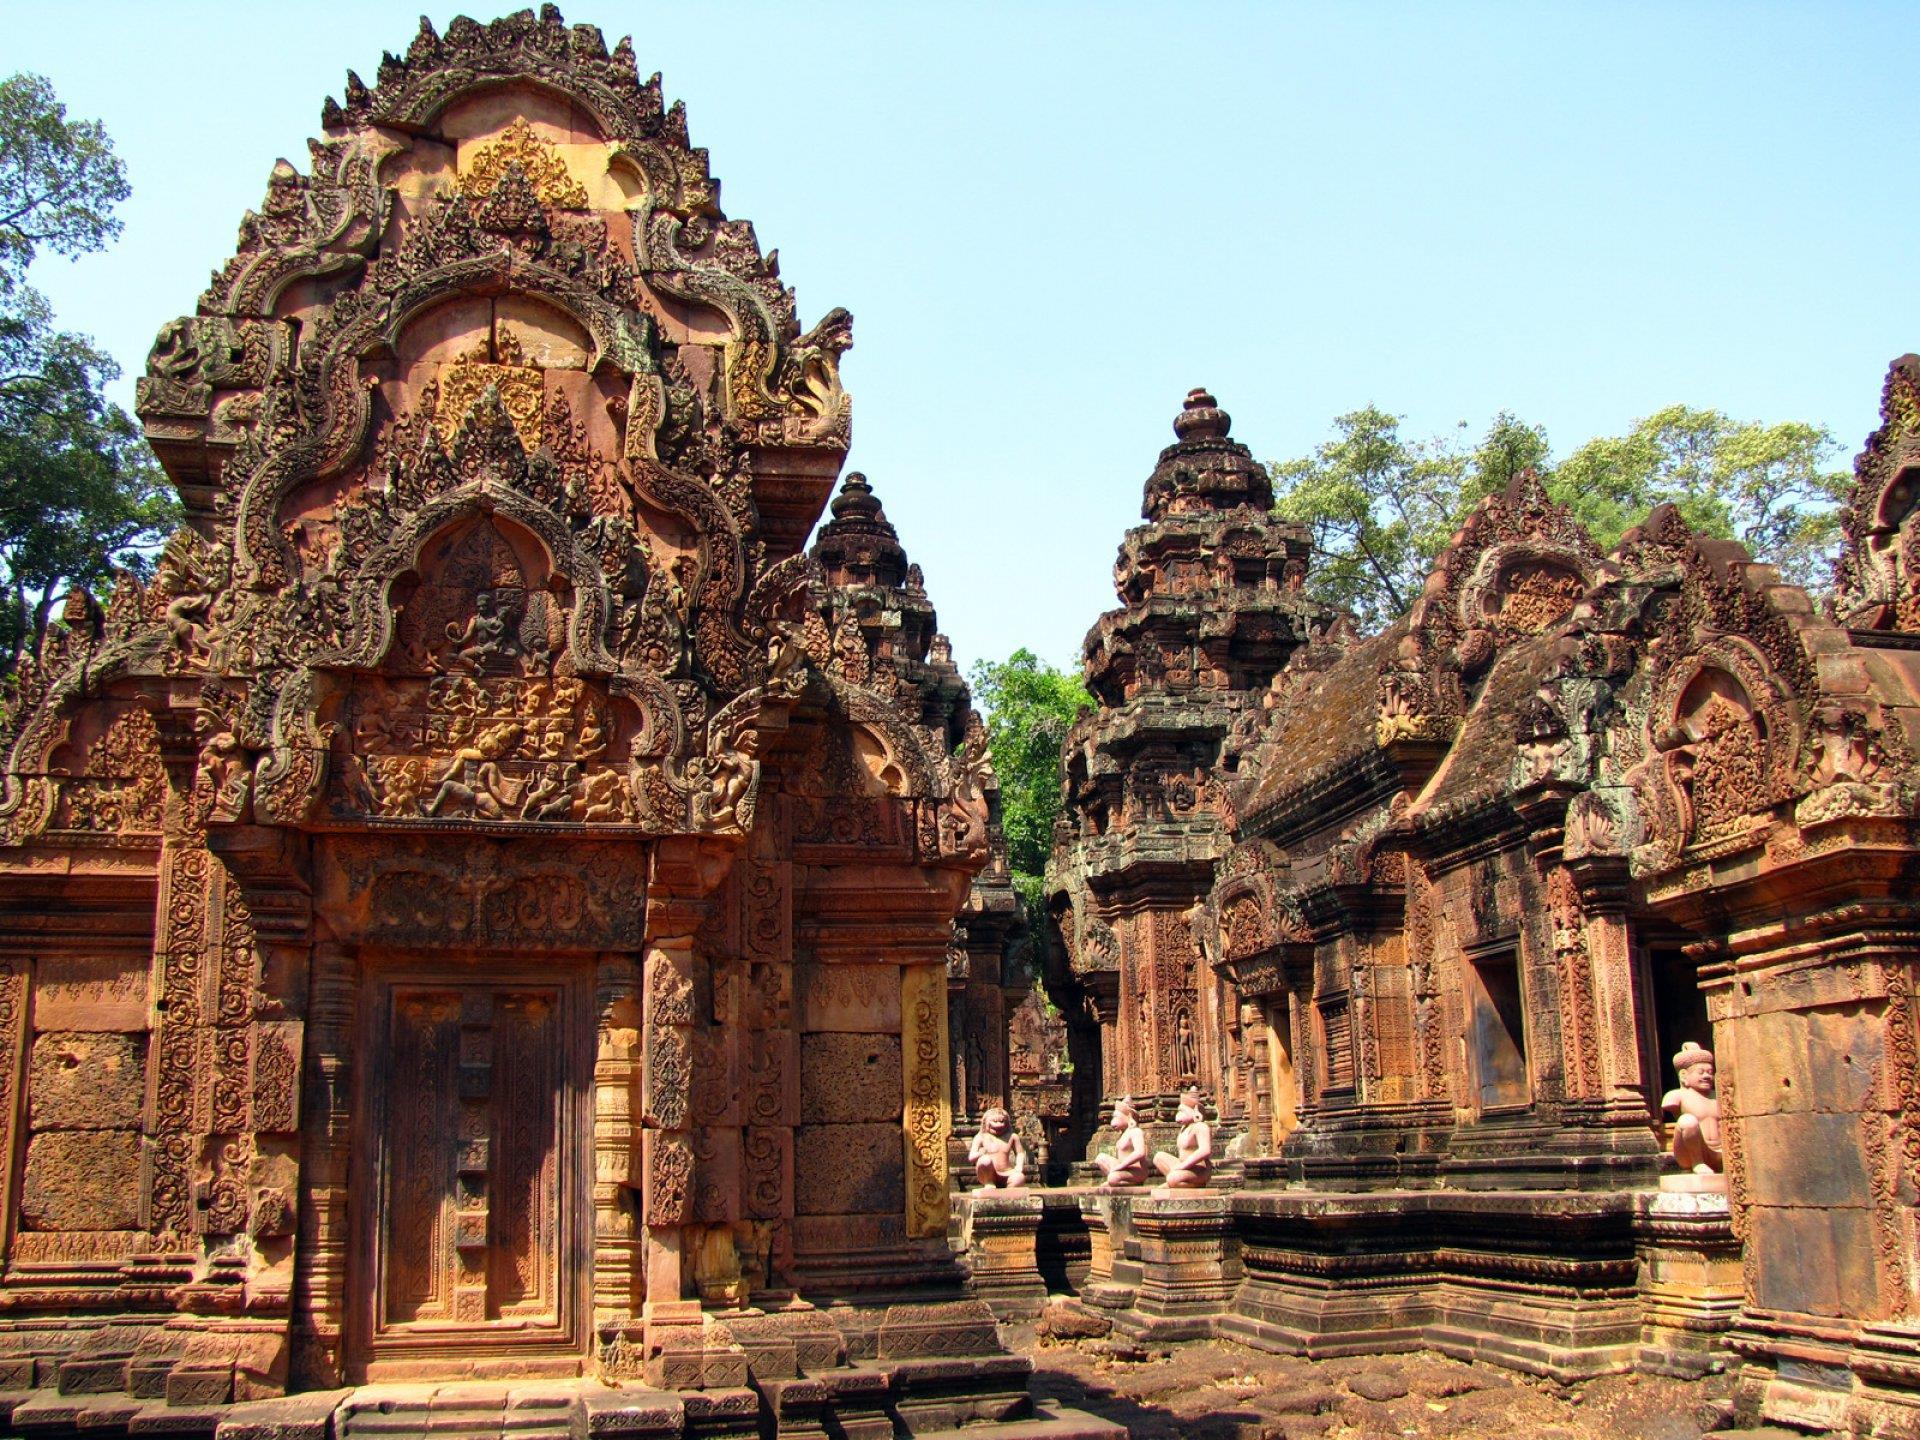 The walls of the ancient temple of Banteay Srei, Cambodia